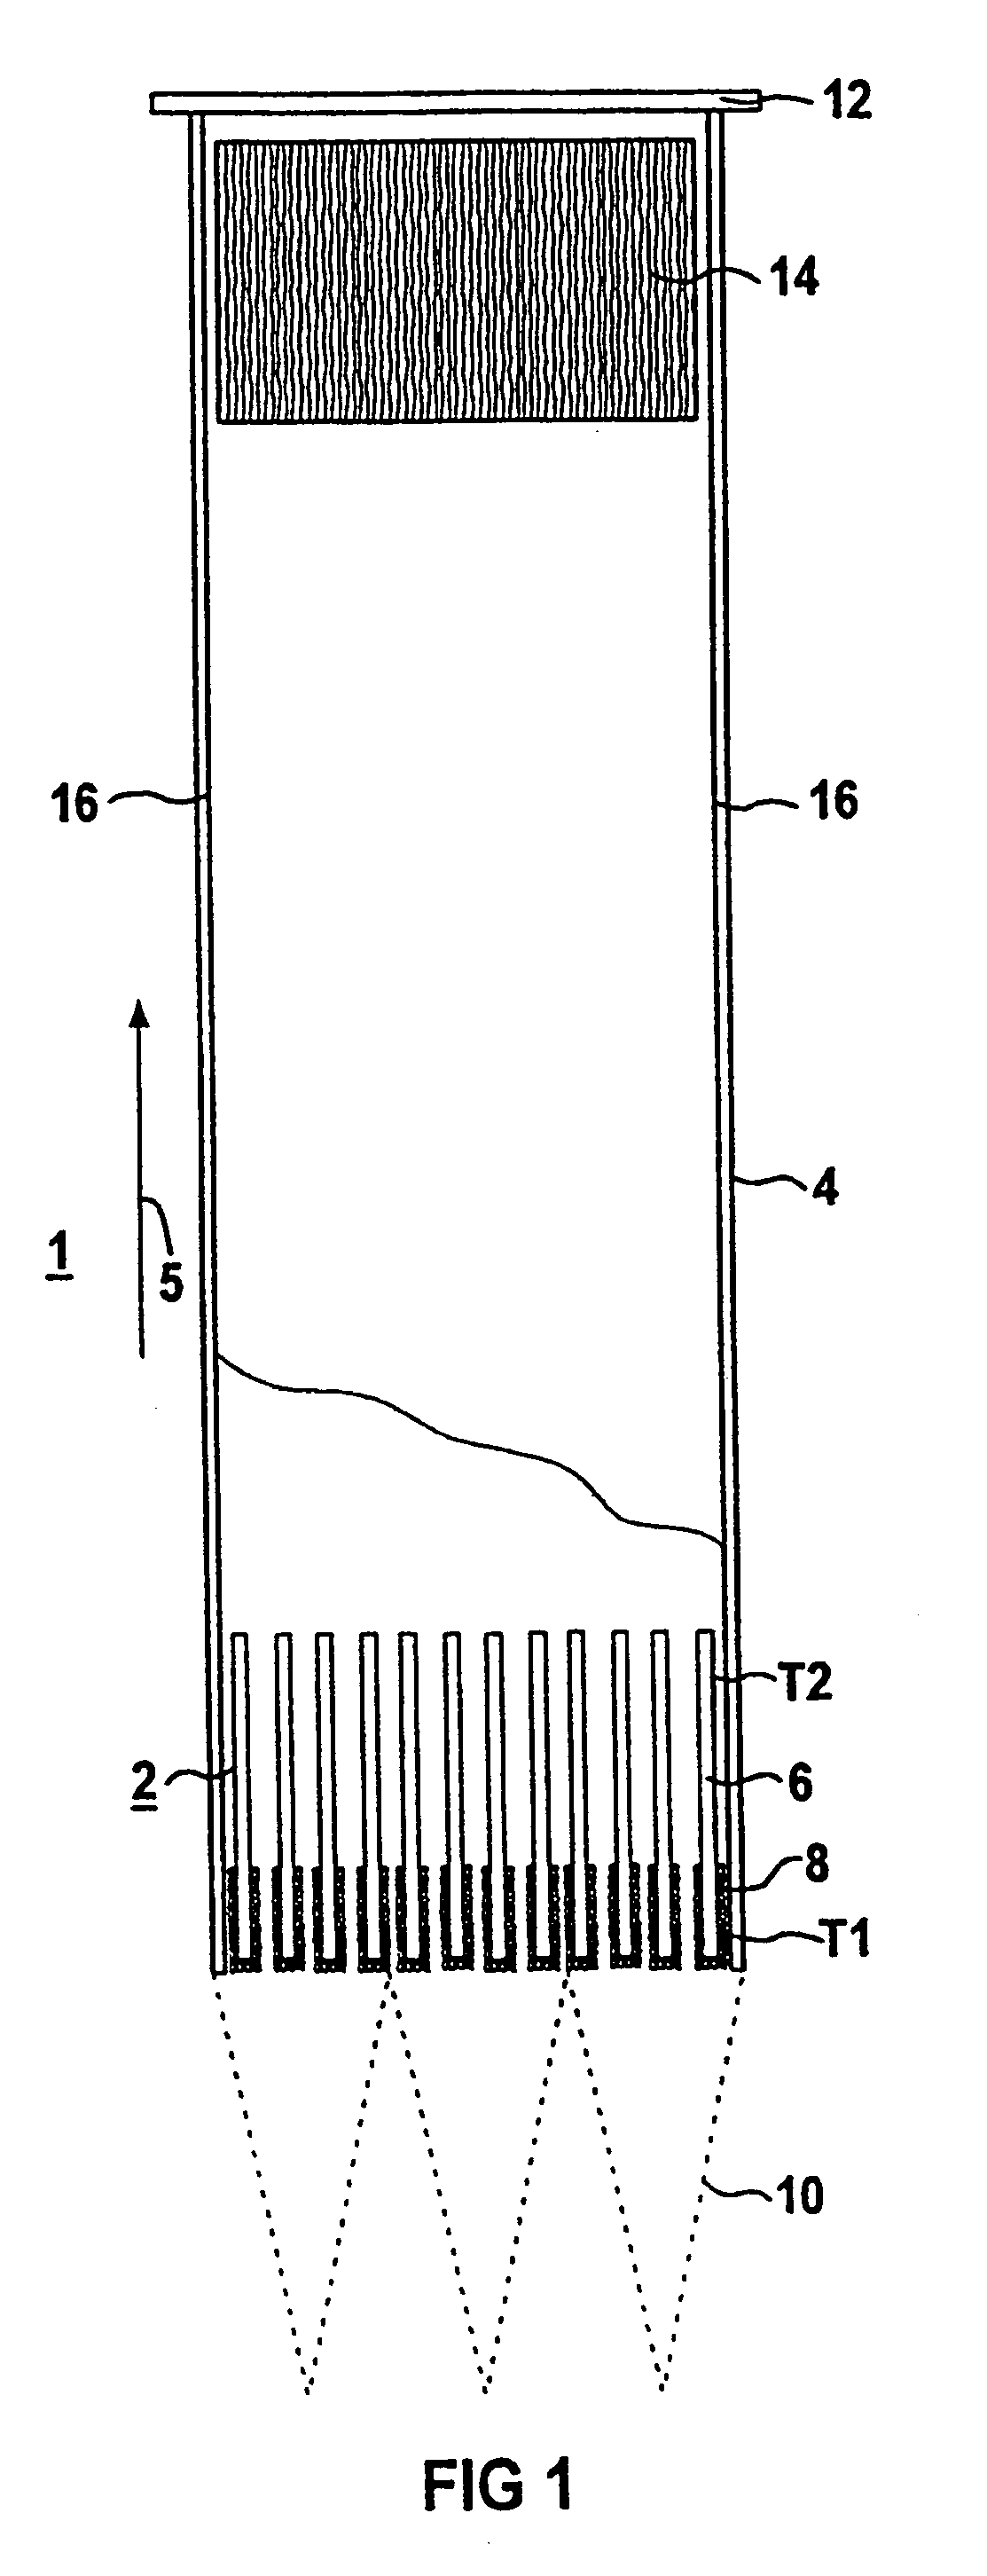 Recombination device and method for catalytically recombining hydrogen and/or carbon monoxide with oxygen in a gaseous mixture